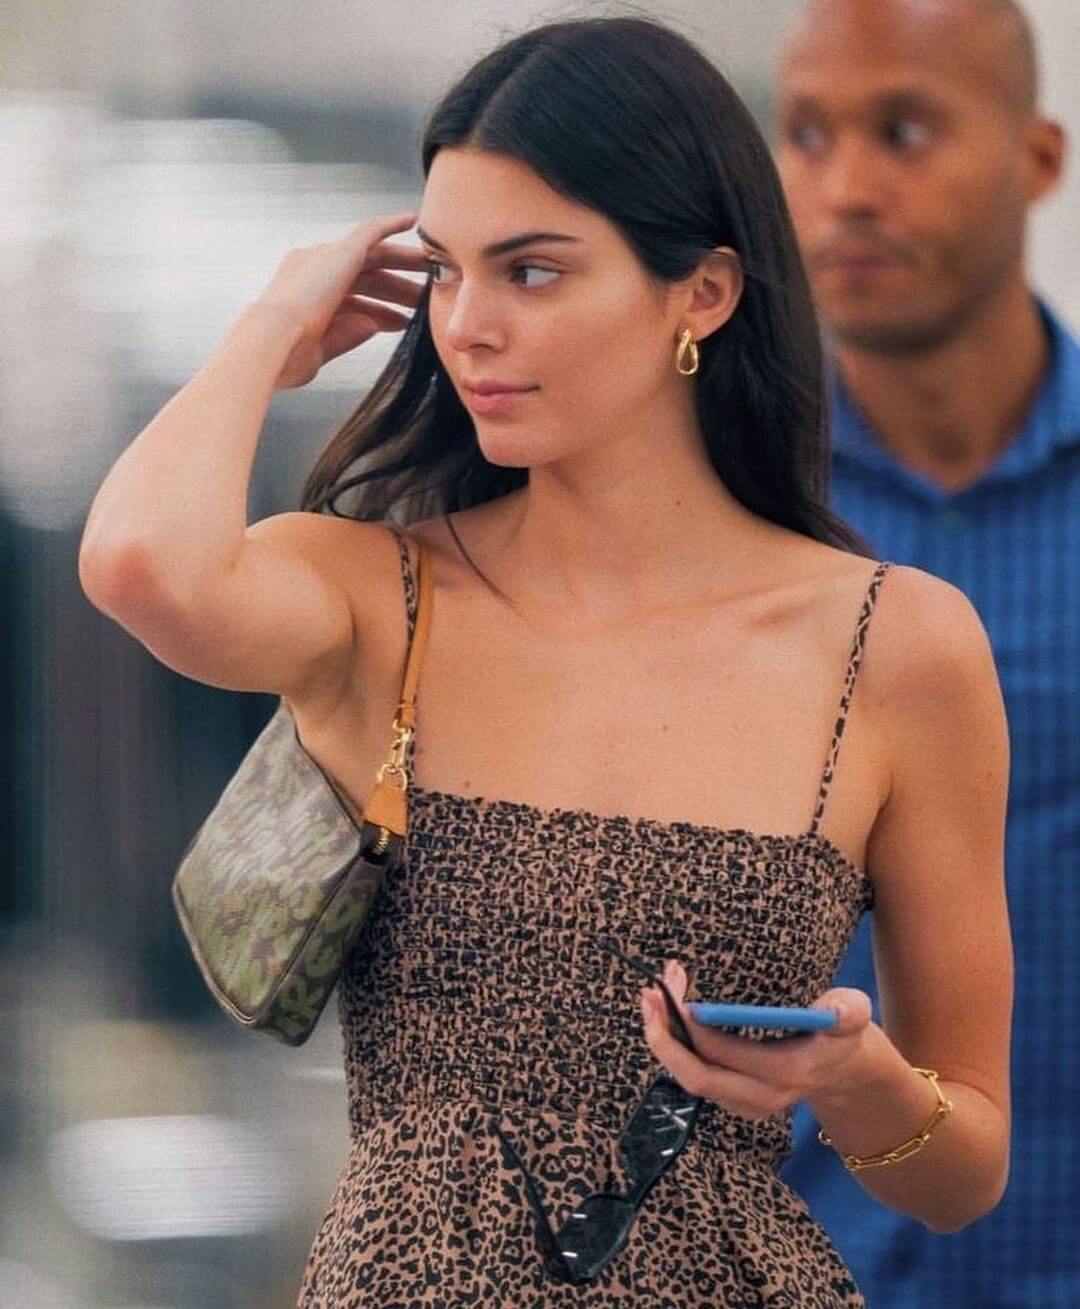 Clothes & Accessories You Need To Dress Like Kendall Jenner - K4